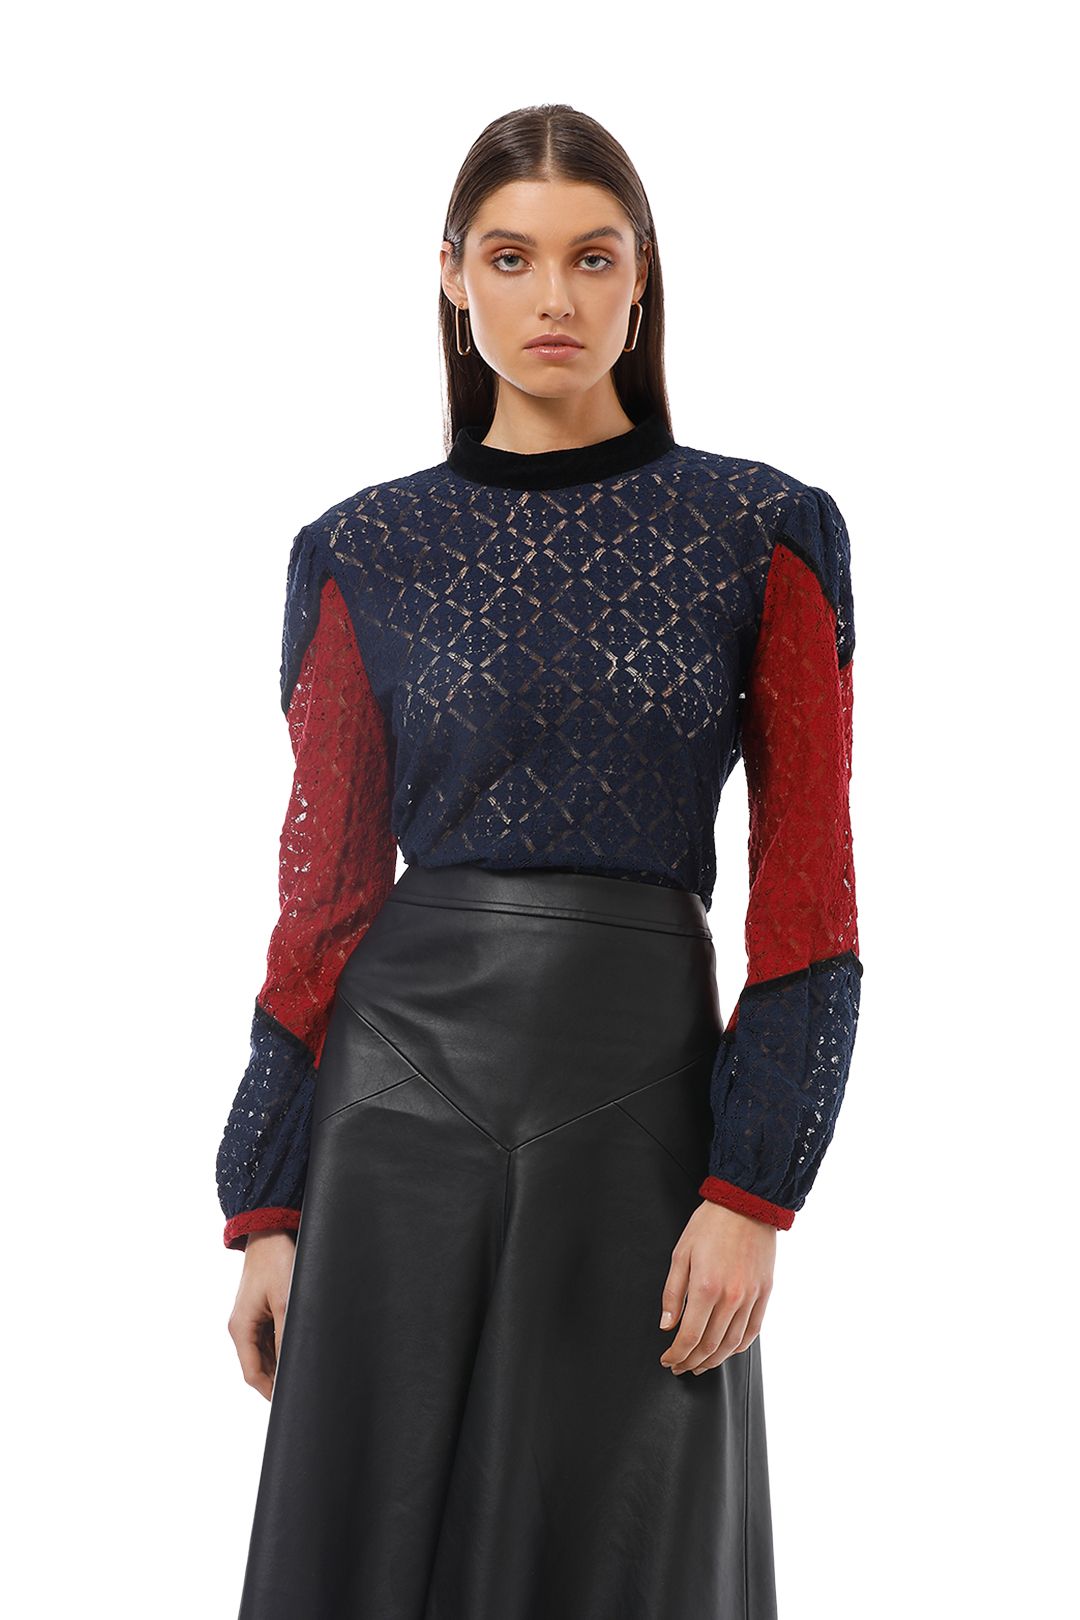 Gysette - Asilah Splice Lace Top - Navy Red - Front Close